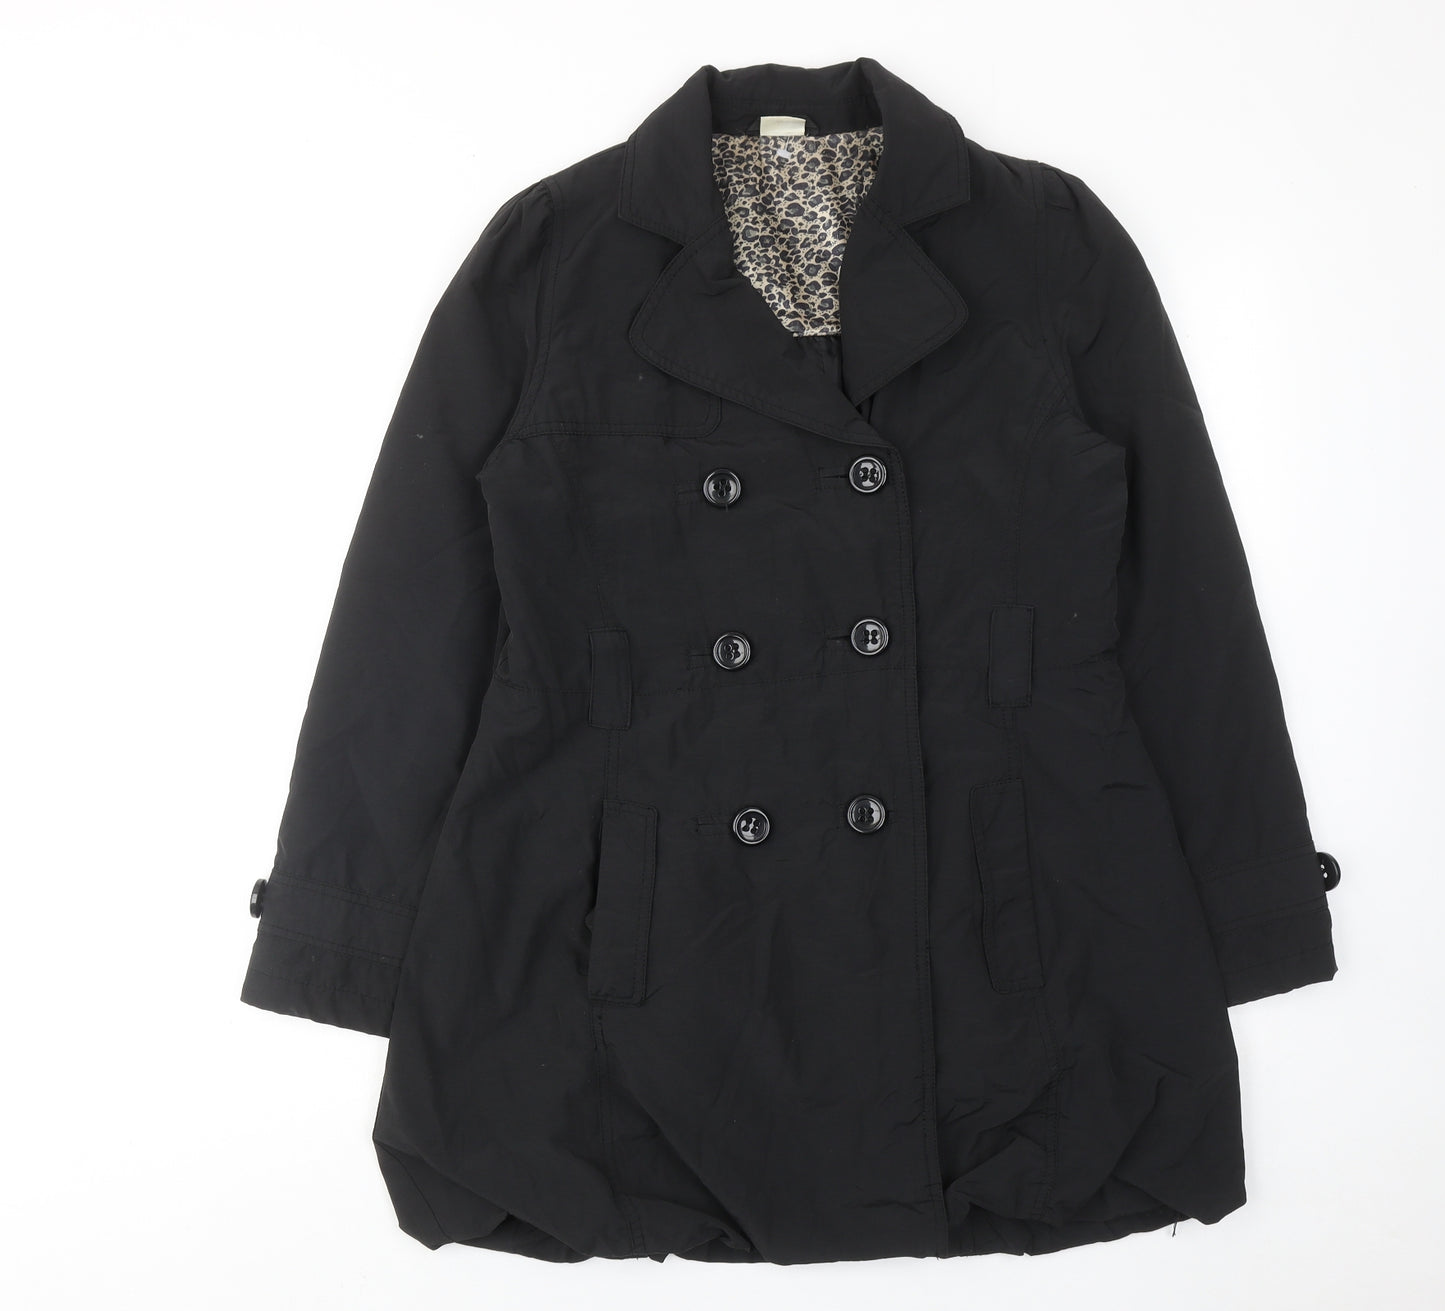 M&Co Girls Black Pea Coat Coat Size 13 Years Button